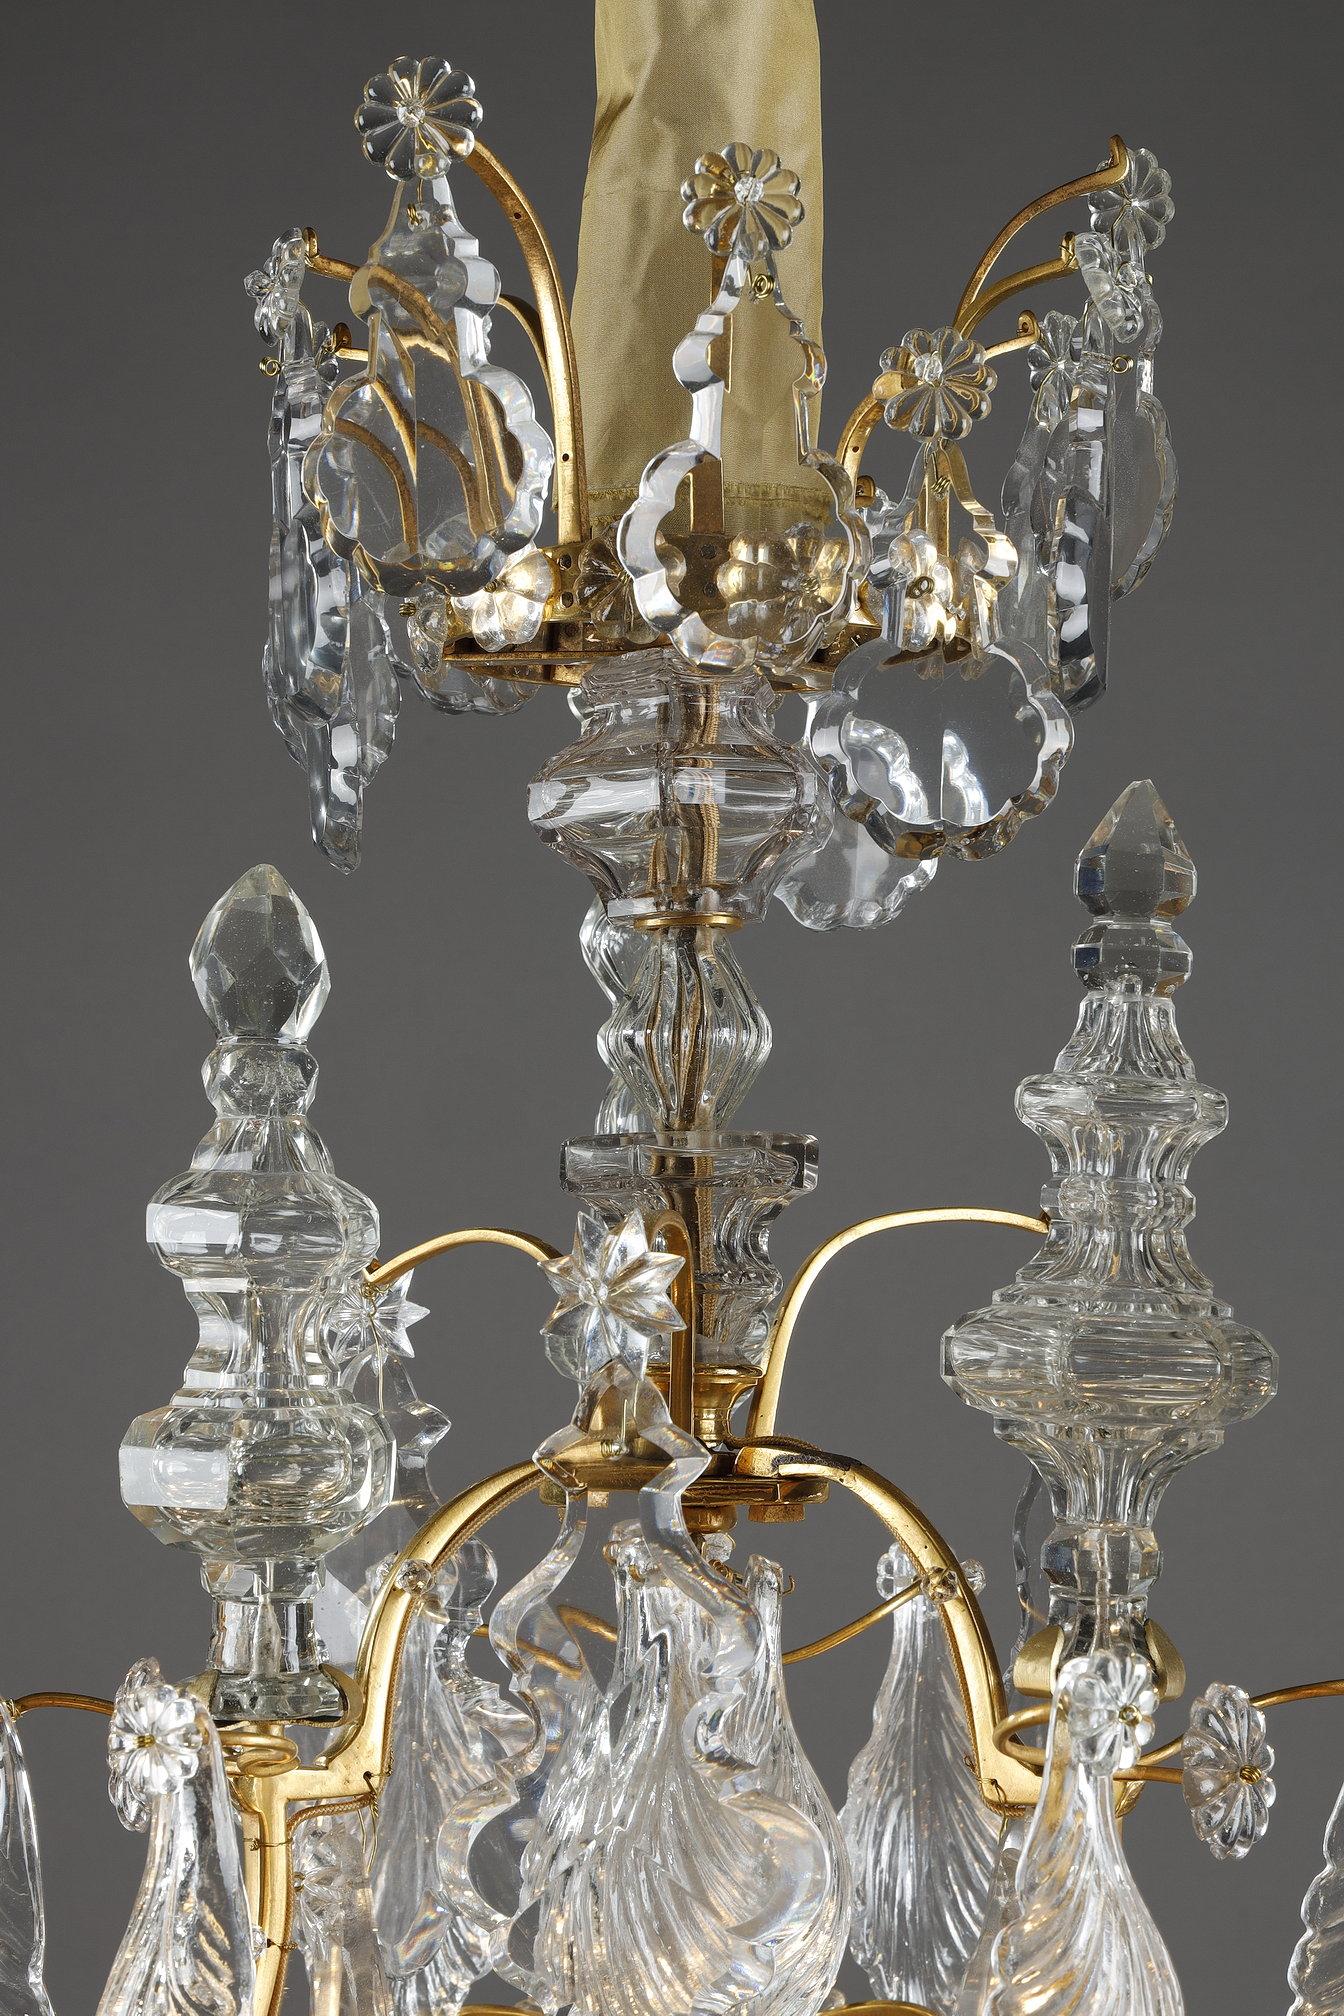 Six-light gilt bronze cage Chandelier with cut crystal pendants and daggers For Sale 1